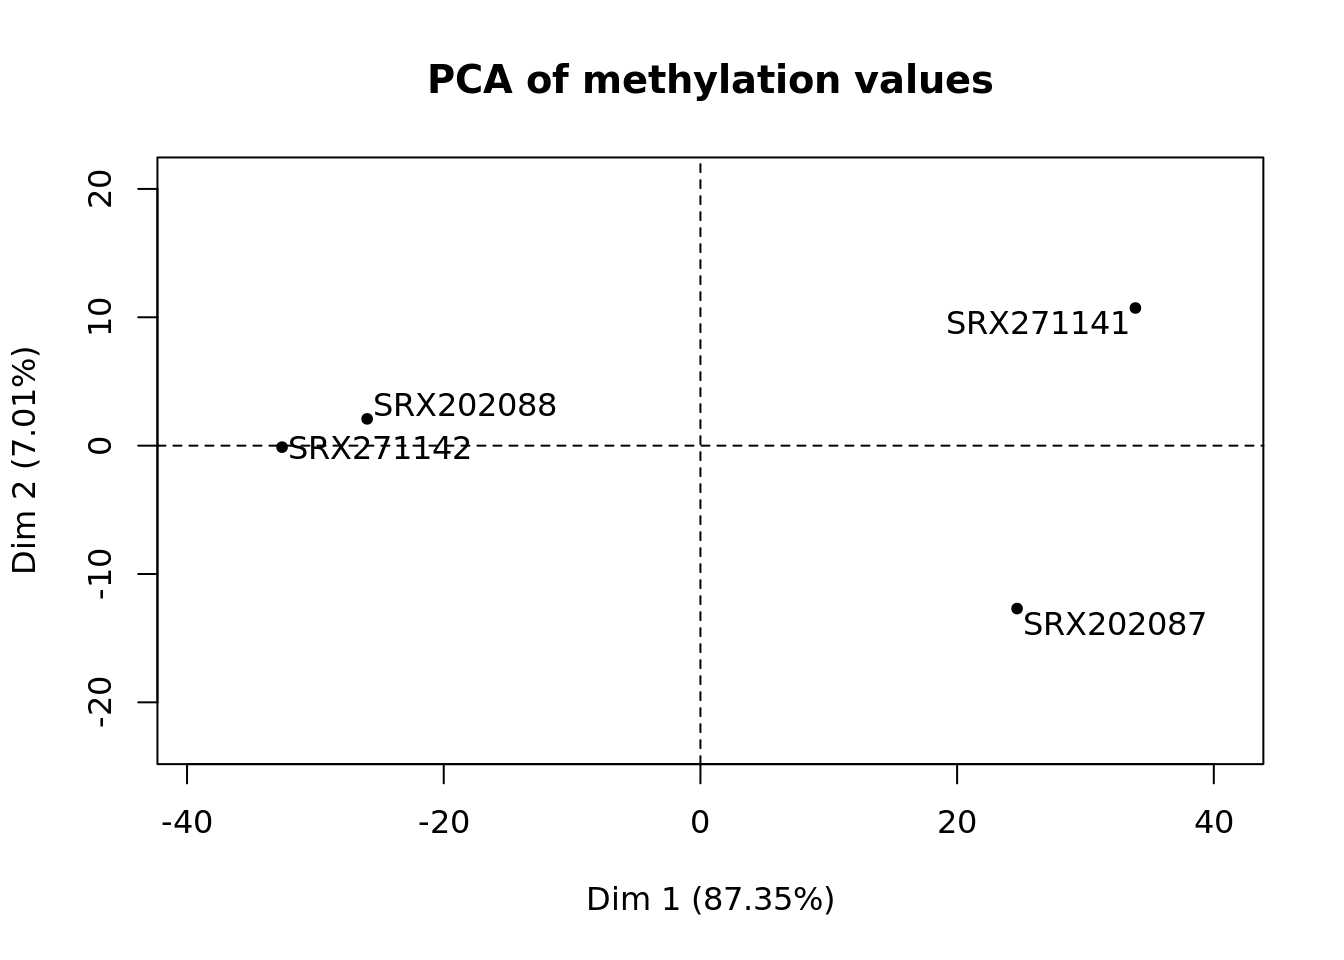 ../../_images/WGBS_PCA_methylation.png